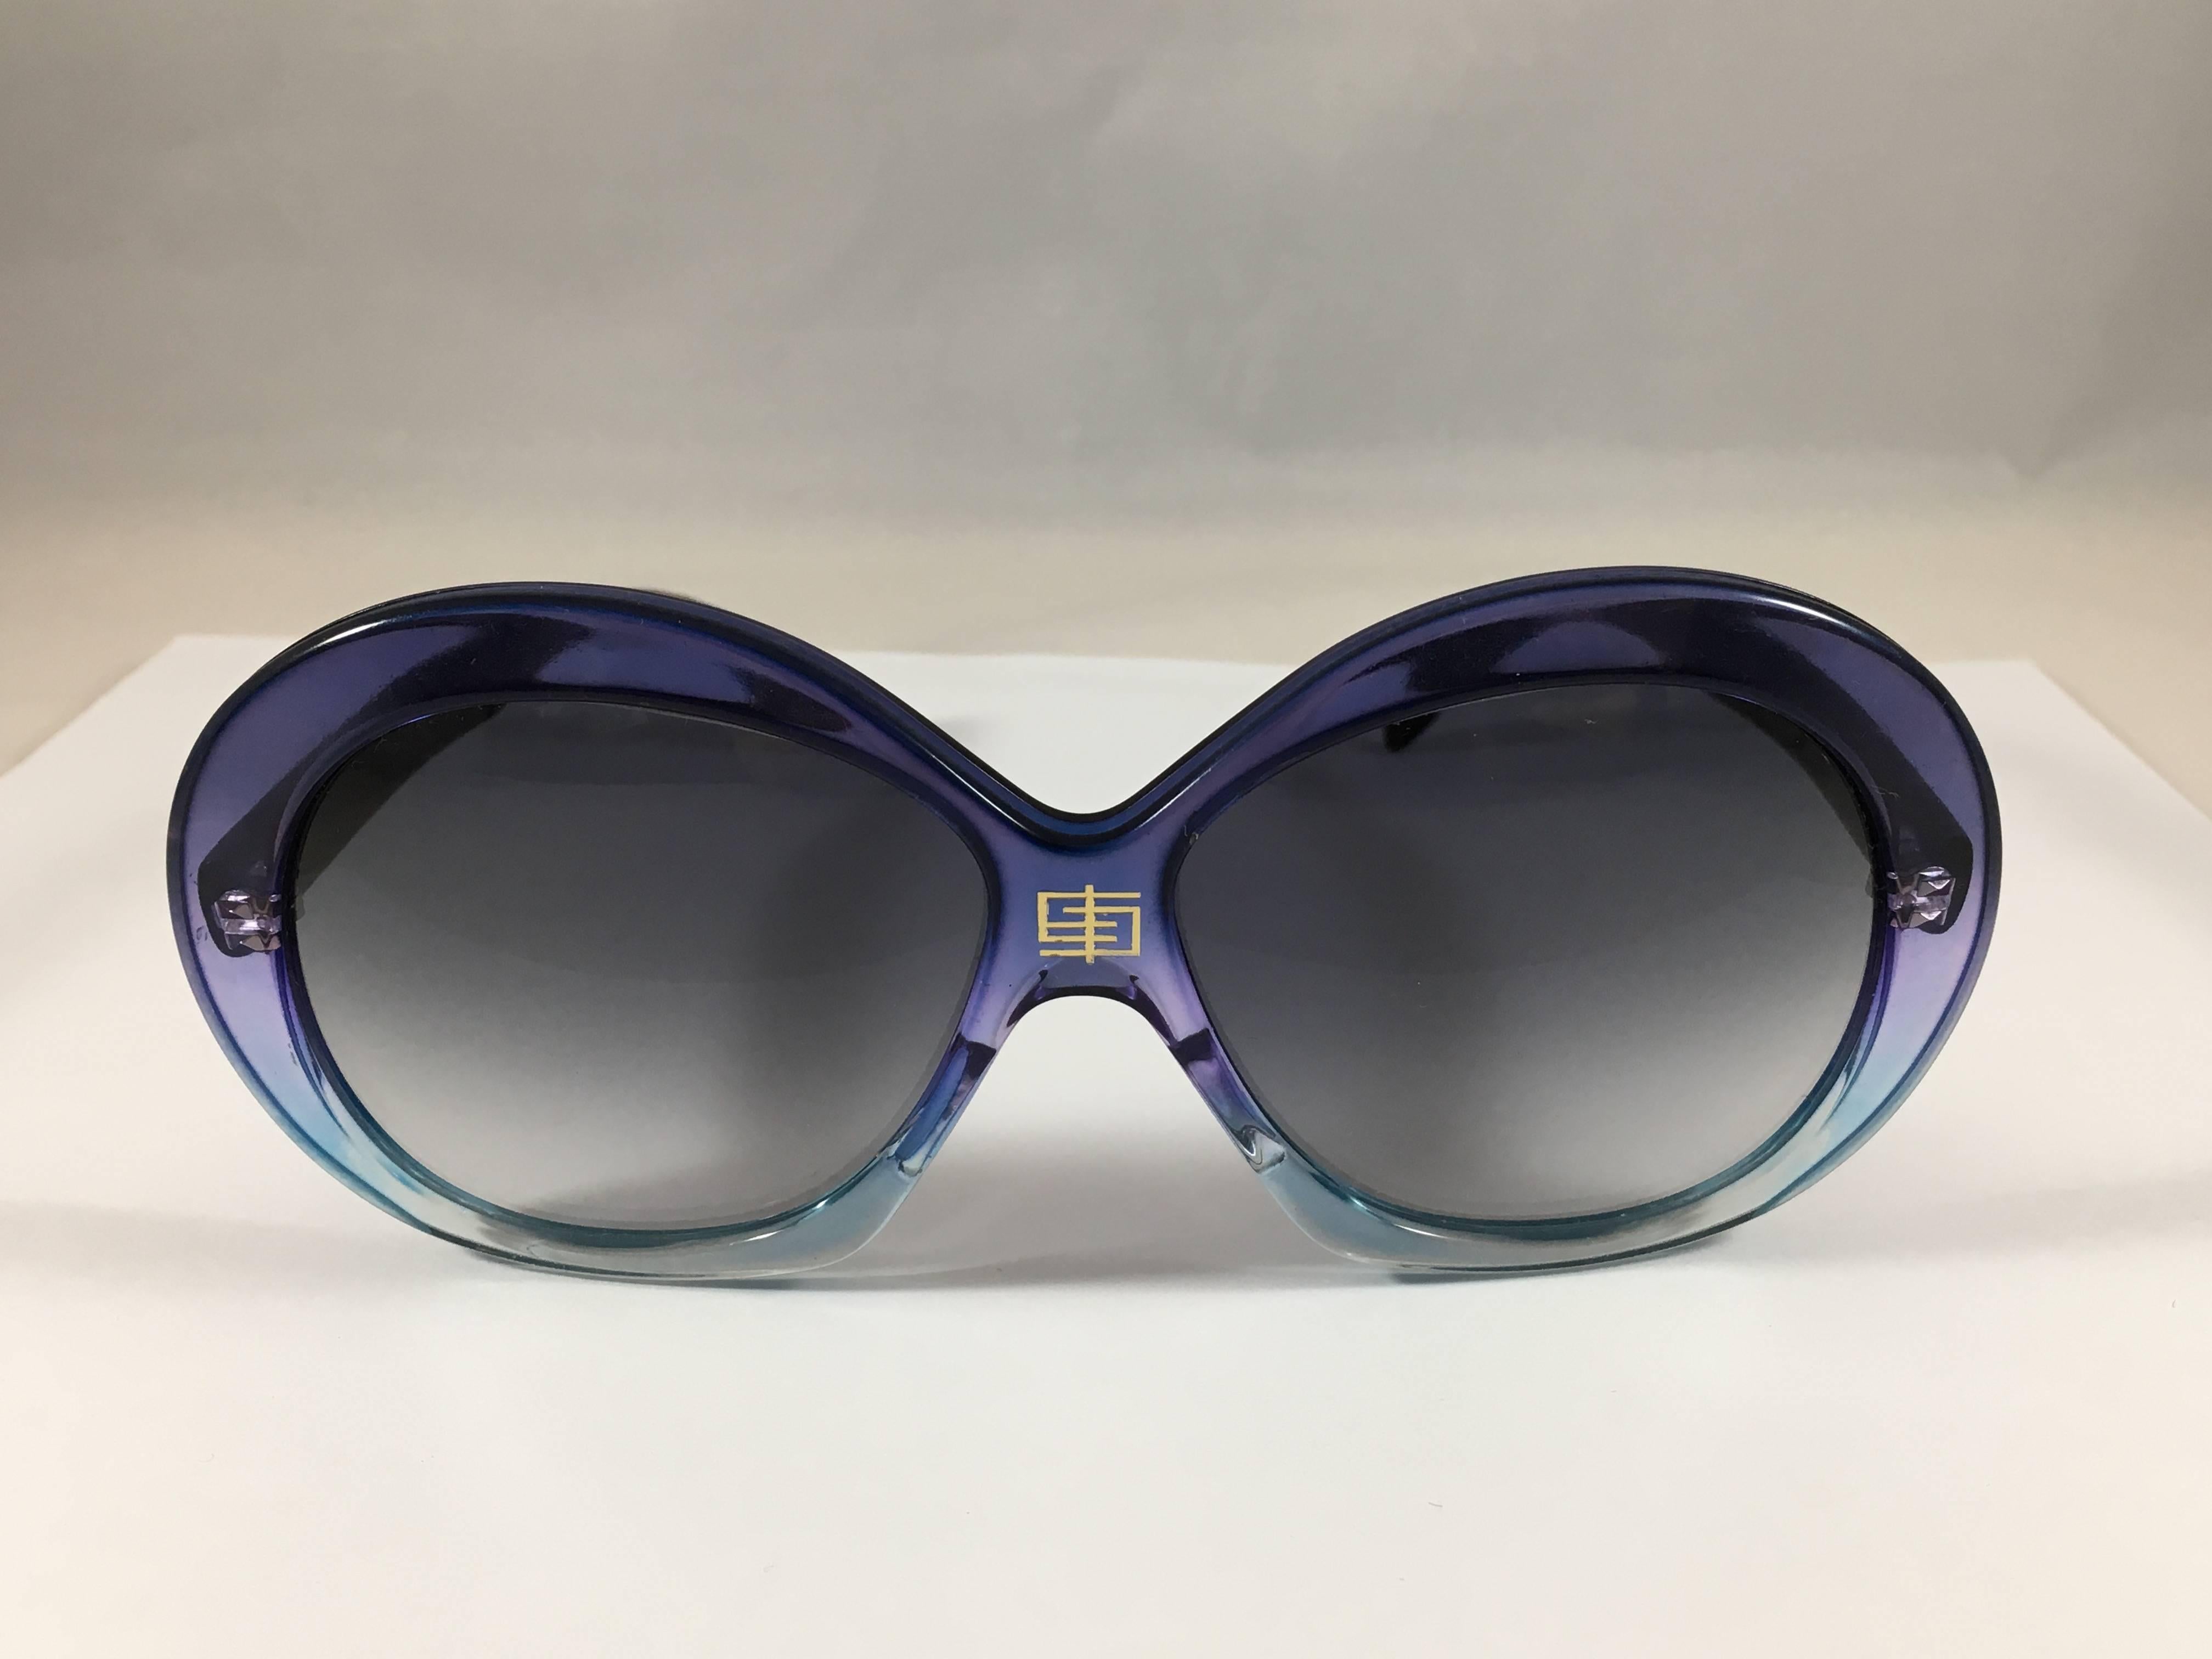 1970s Emilio Pucci blue ombre sunglasses with oversized round frames. On the center bridge of the frames there is a gold interlocking 'E' Pucci logo. Each arm of the glasses is marked with a gold 'Emilio Pucci'. One of the inside arms is marked